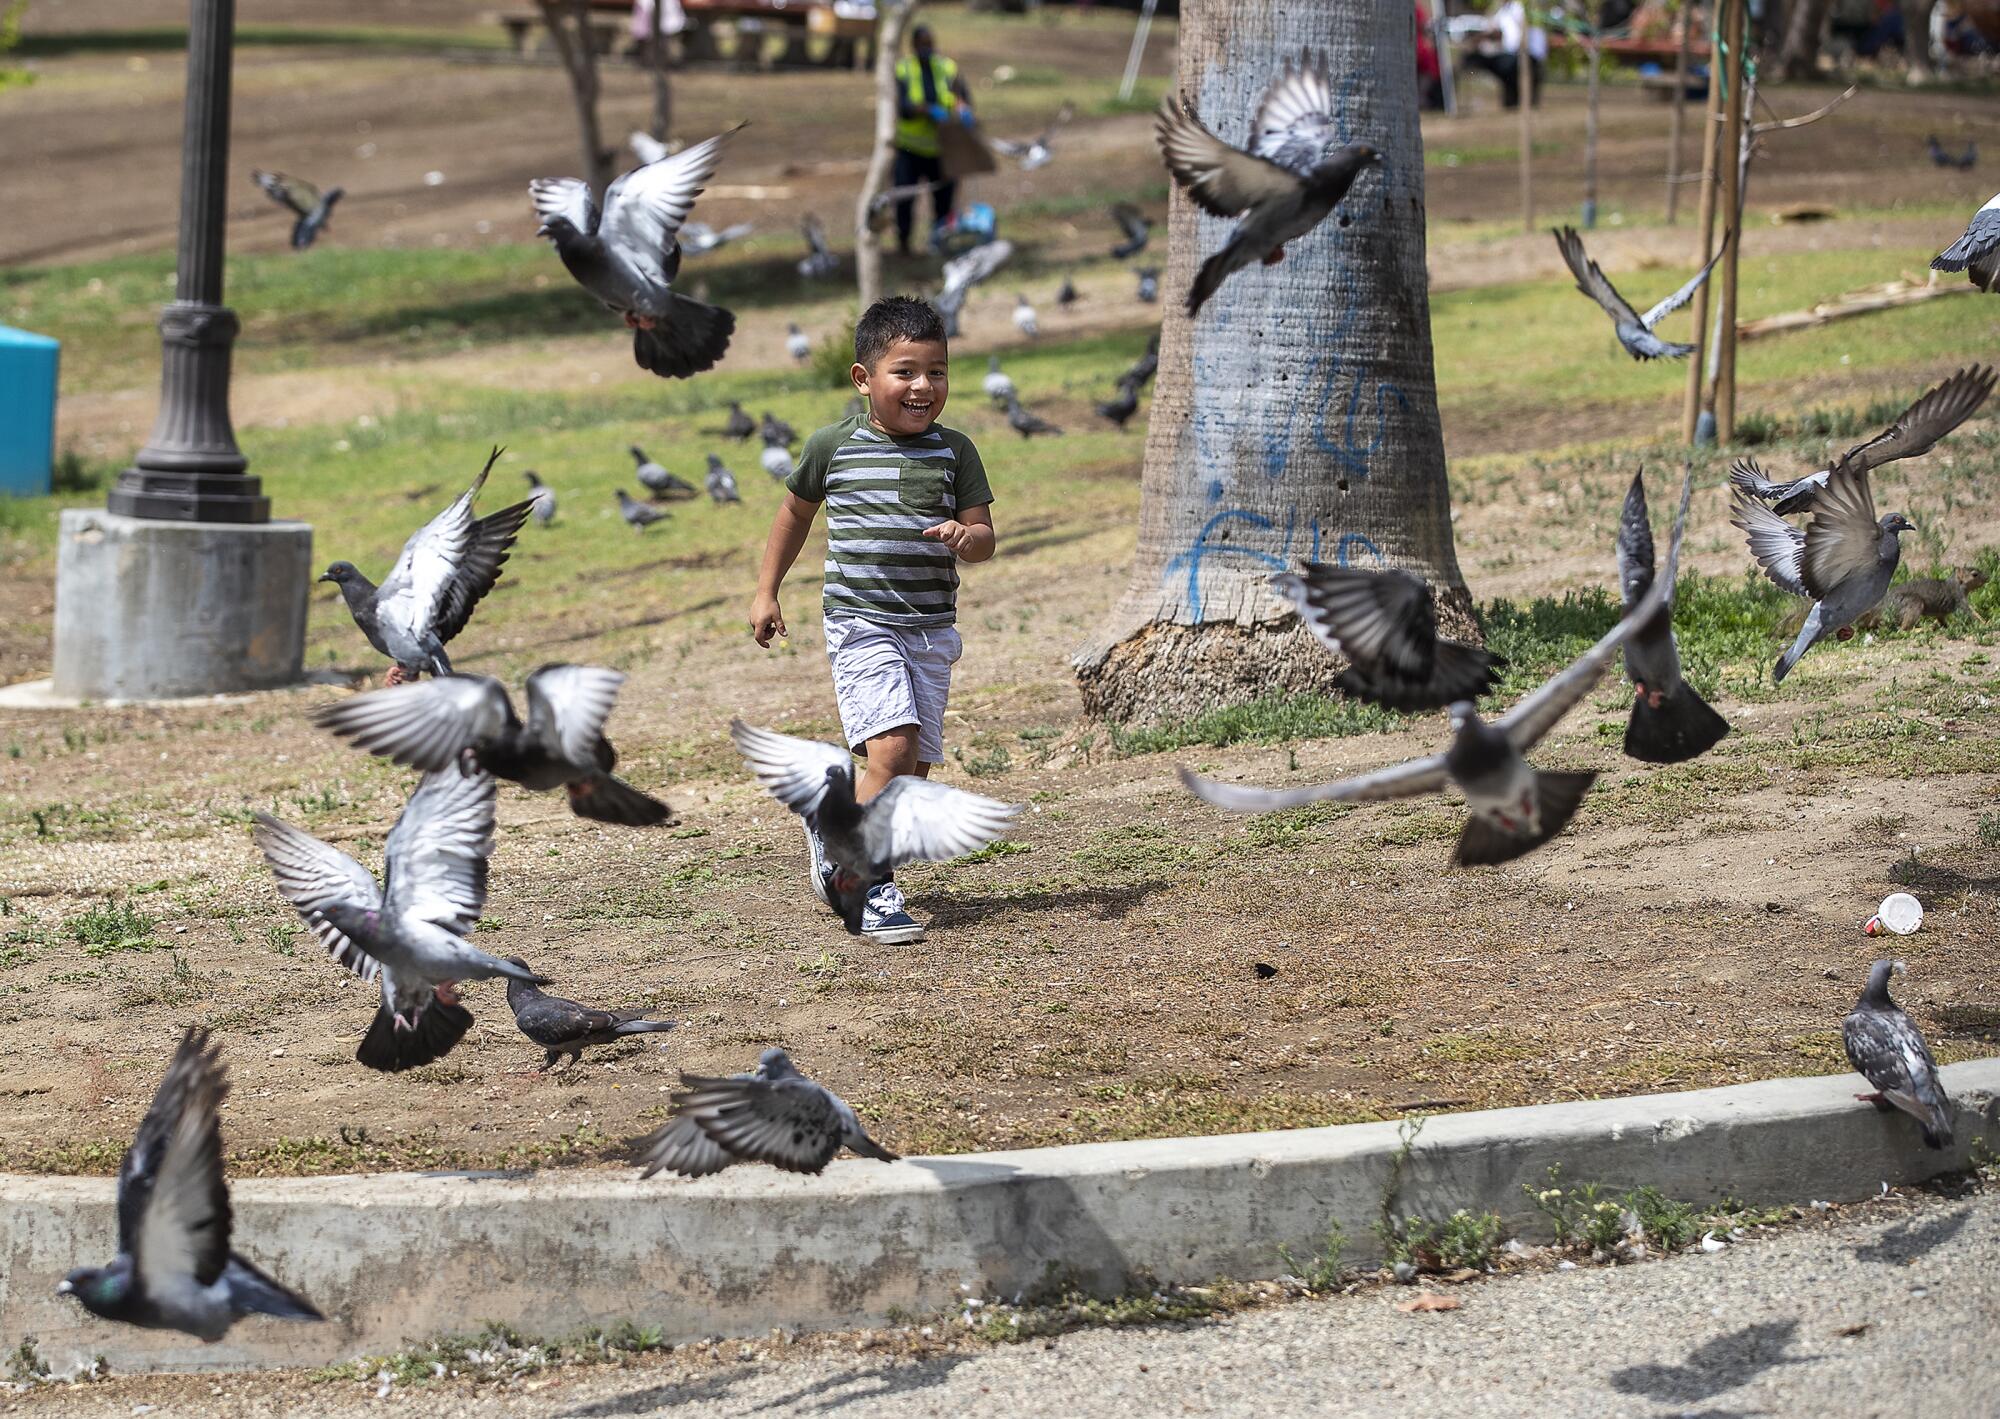 Landon Victor, 3, of Long Beach, chases after pigeons while playing at MacArthur Park in Los Angeles.